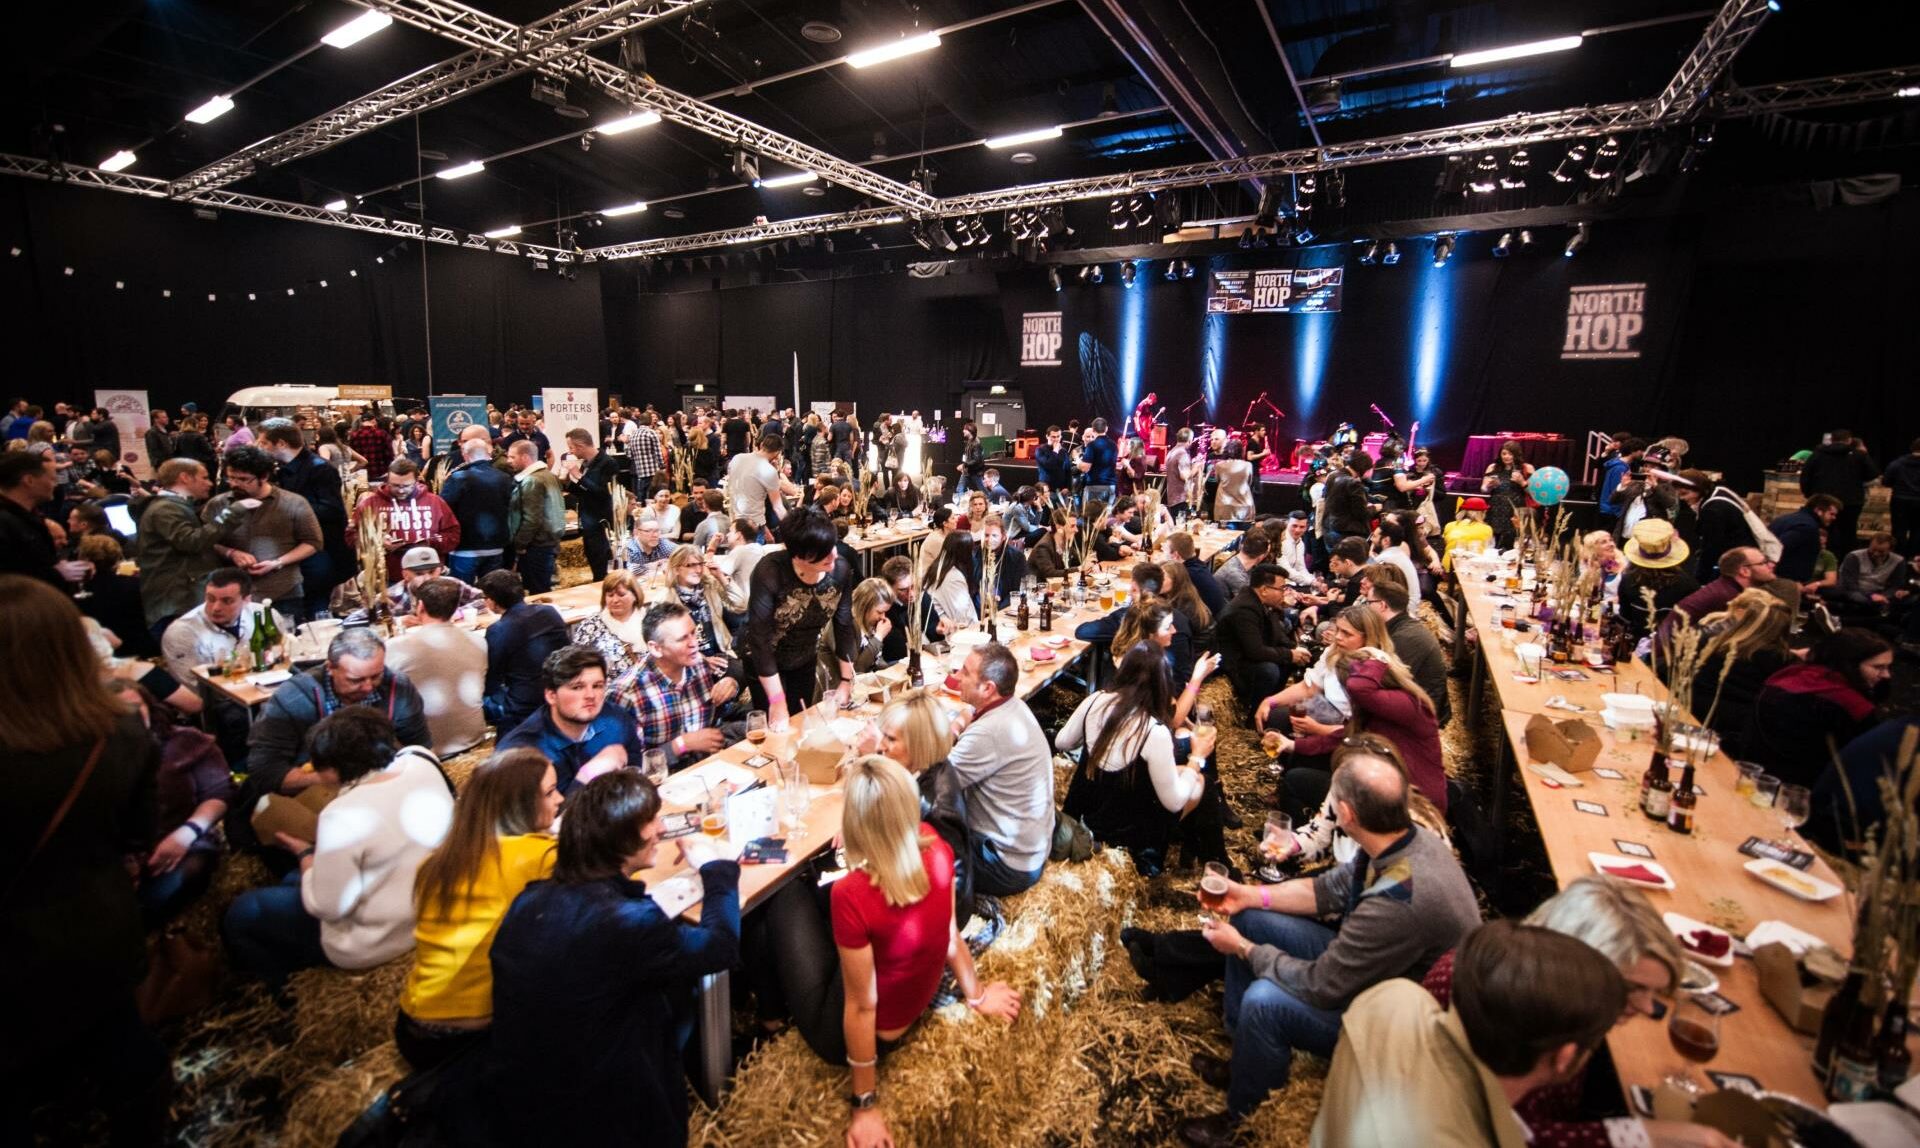 Craft drinks and road food stuff festival North Hop to acquire location in Aberdeen